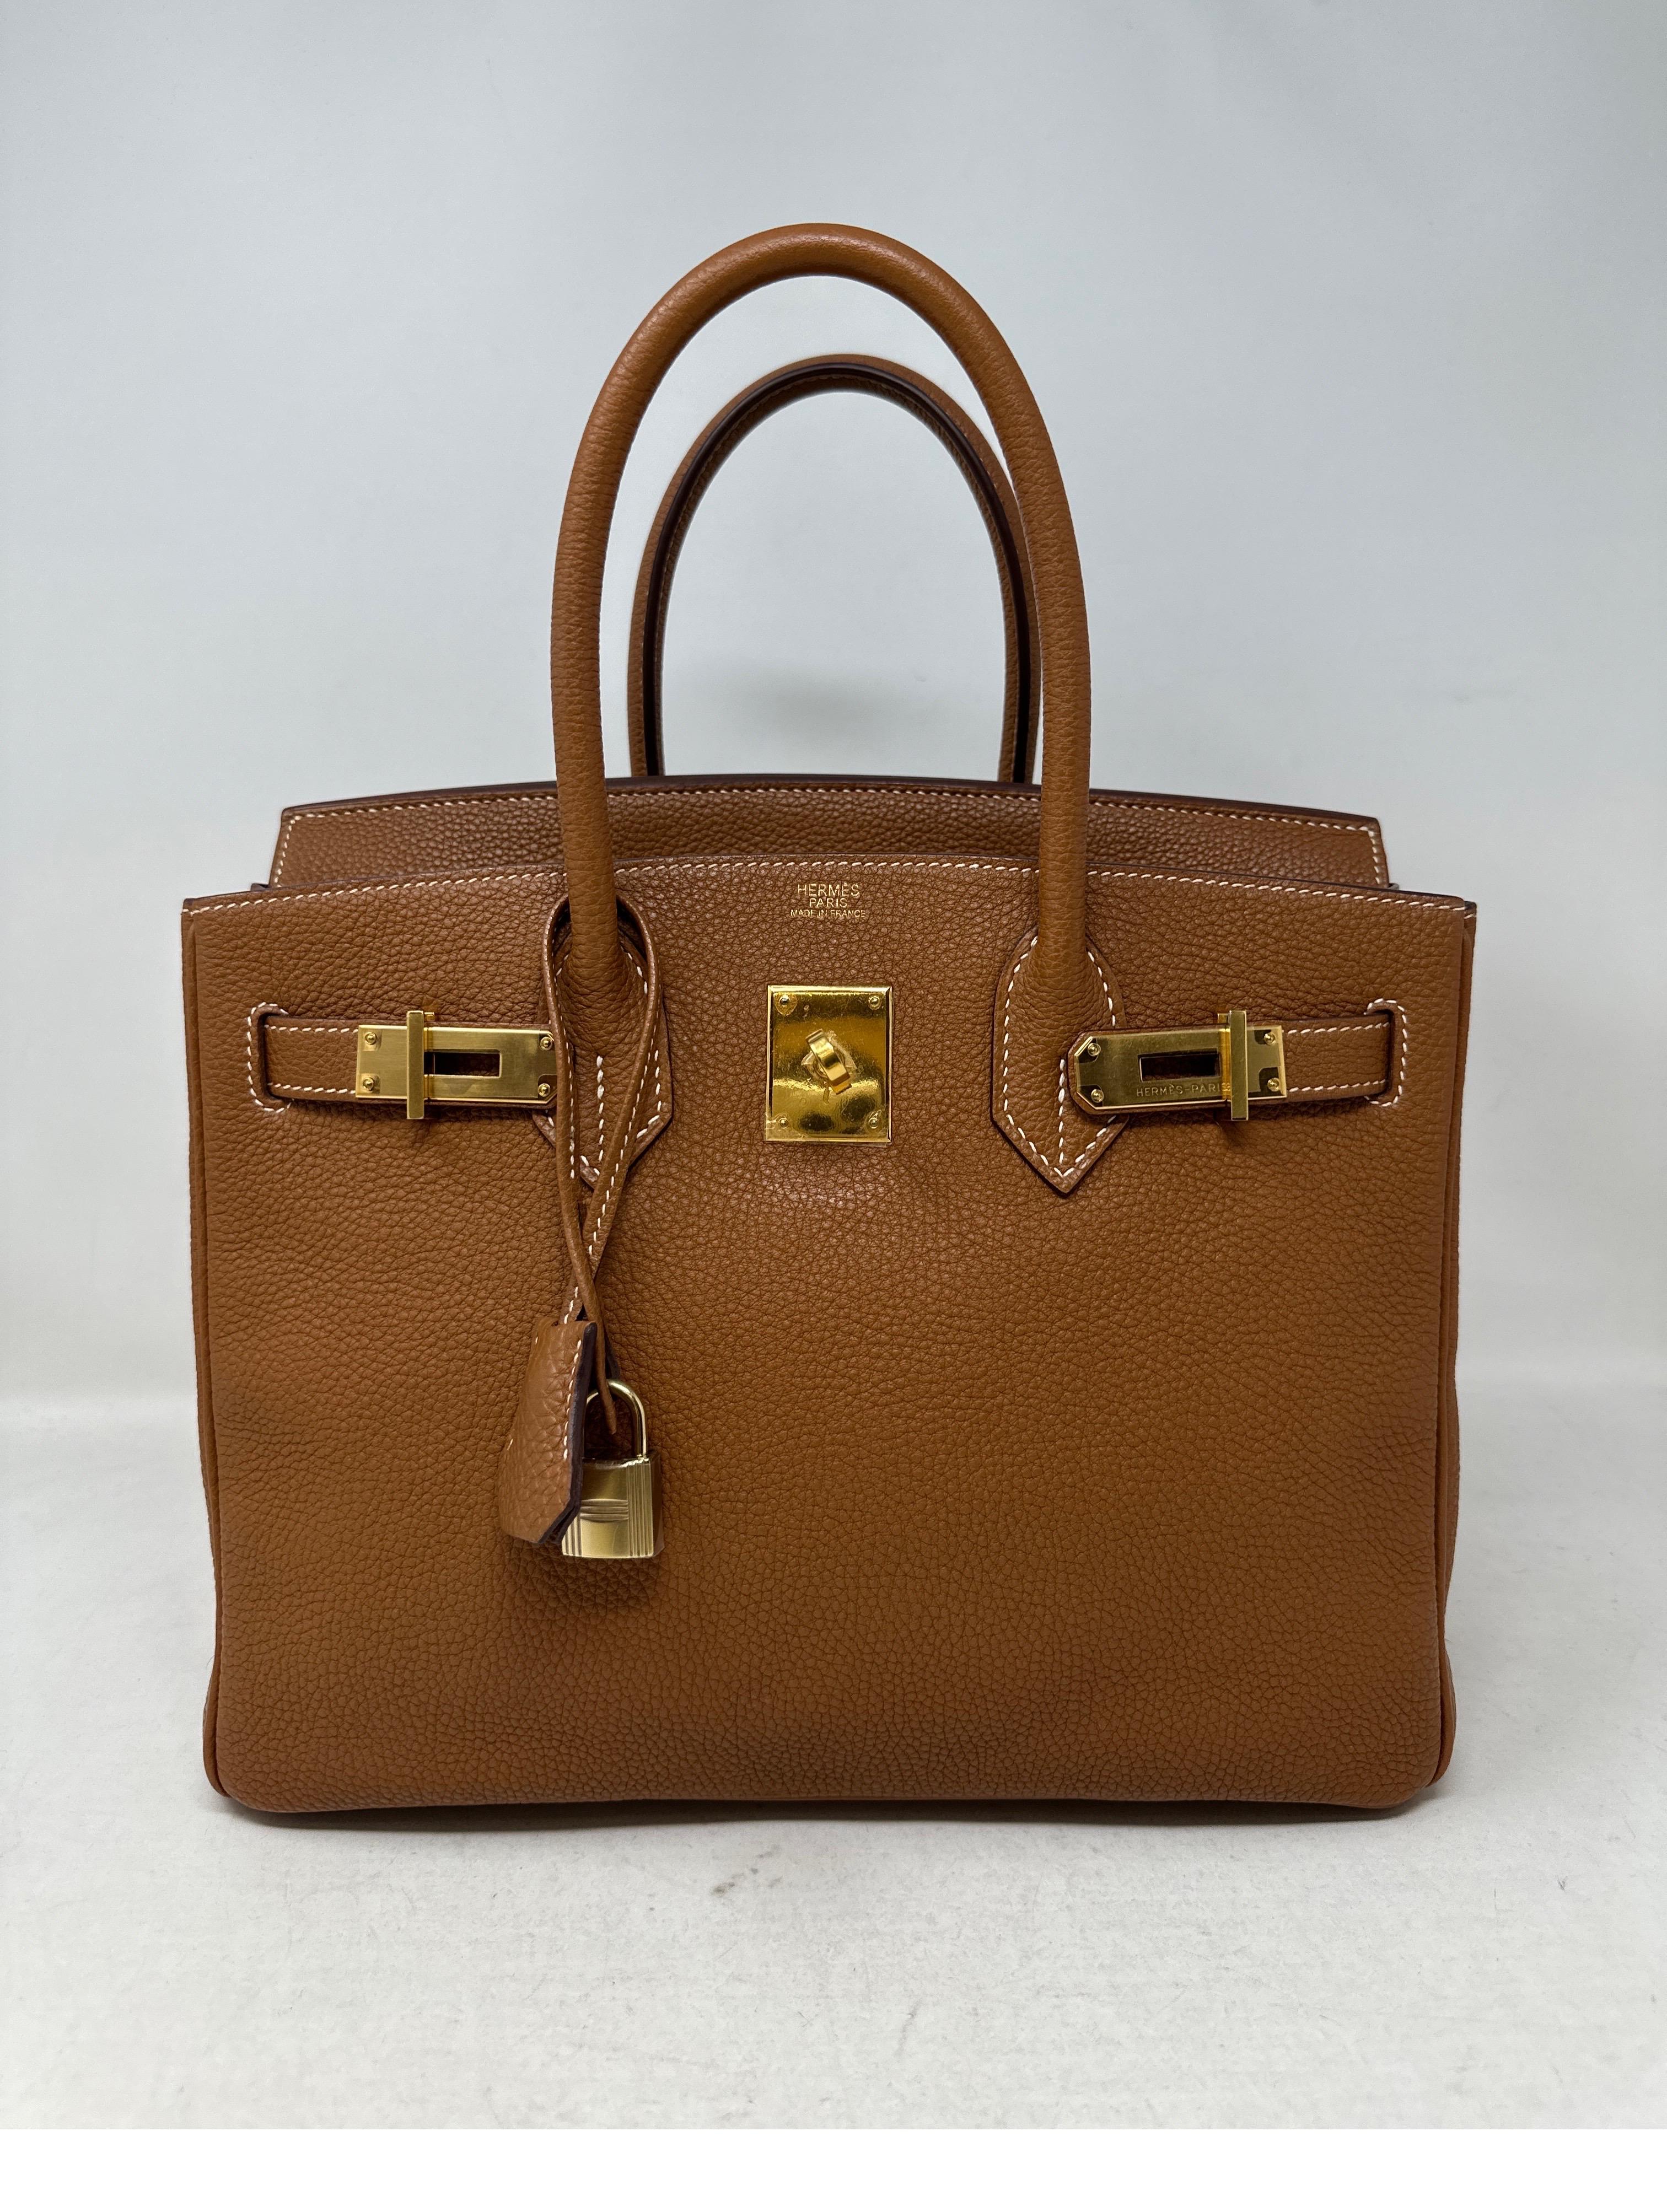 Hermes Gold Birkin 30 Bag. Excellent condition. Most wanted color gold with gold hardware. Rare combination to find. Interior clean. Togo leather. Includes clochette, lock ,keys, and dust bag. Guaranteed authentic. 